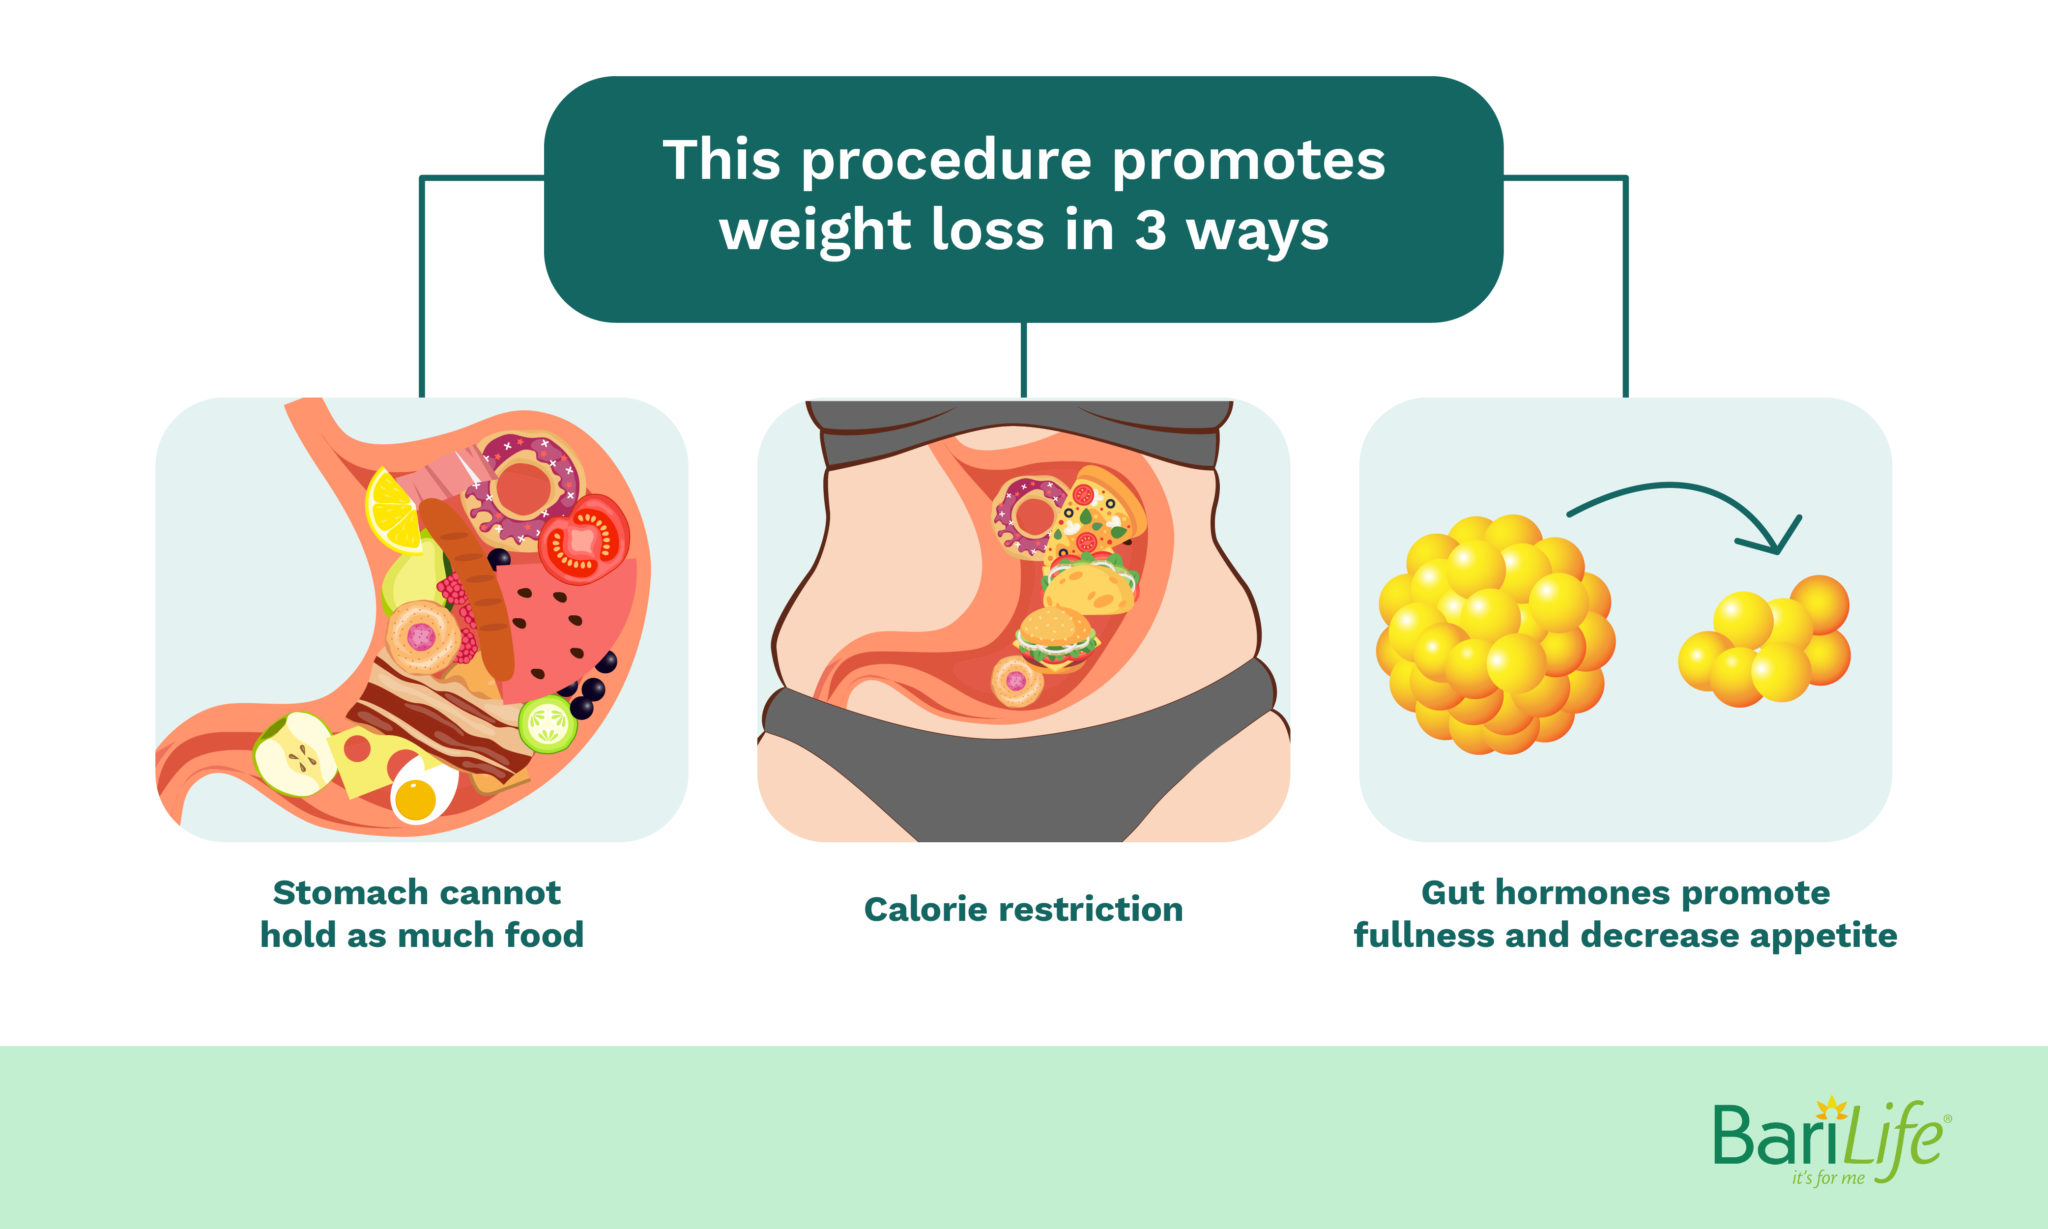 Pros And Cons Of Gastric Bypass Surgery Barilife Educational Blogs